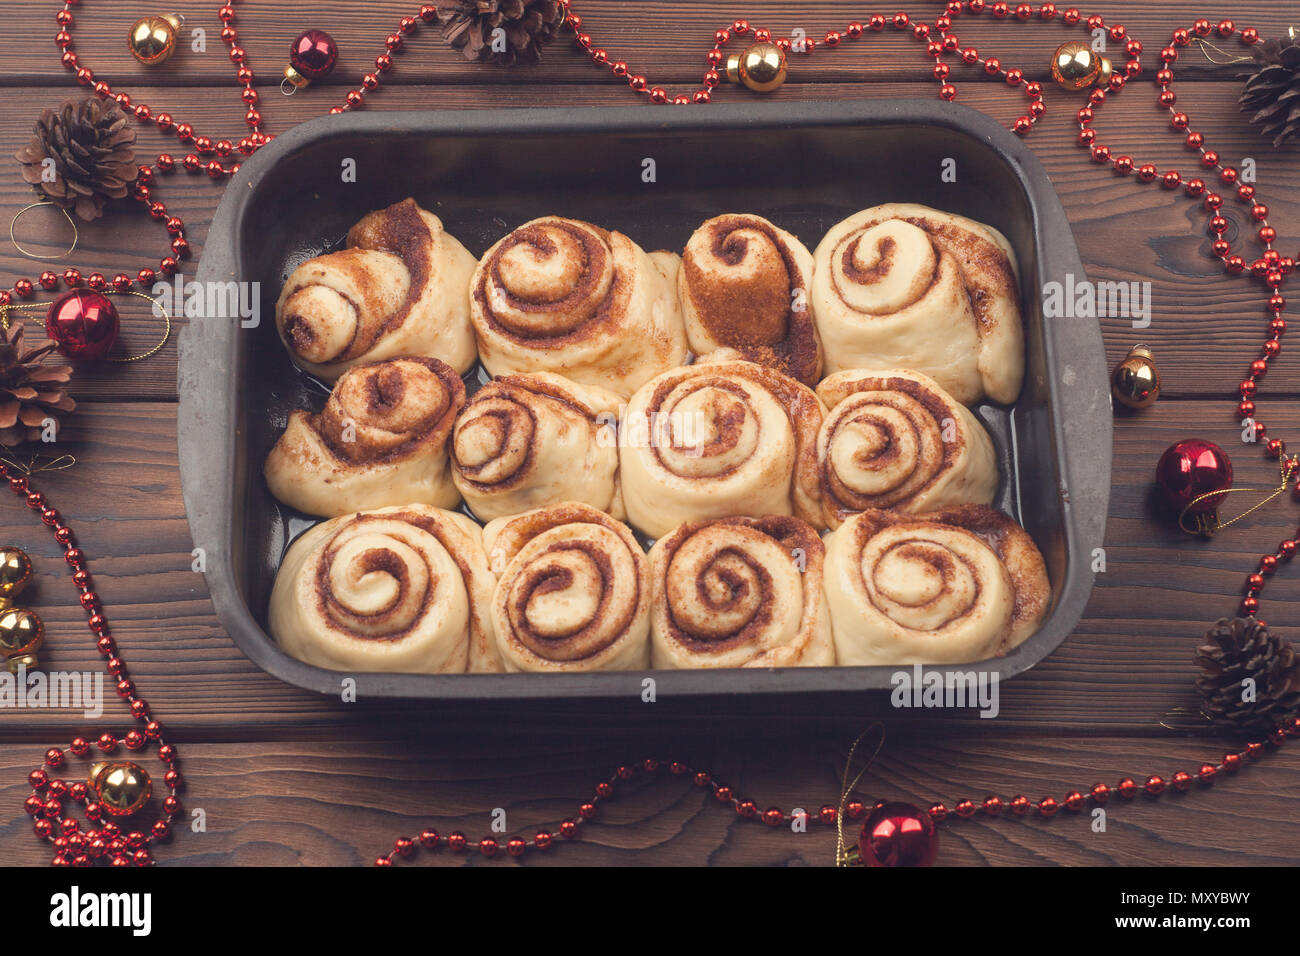 Raw cinnamon rolls. Preparation process - unbaked dough, waiting befor baking, new year atmosphere Stock Photo